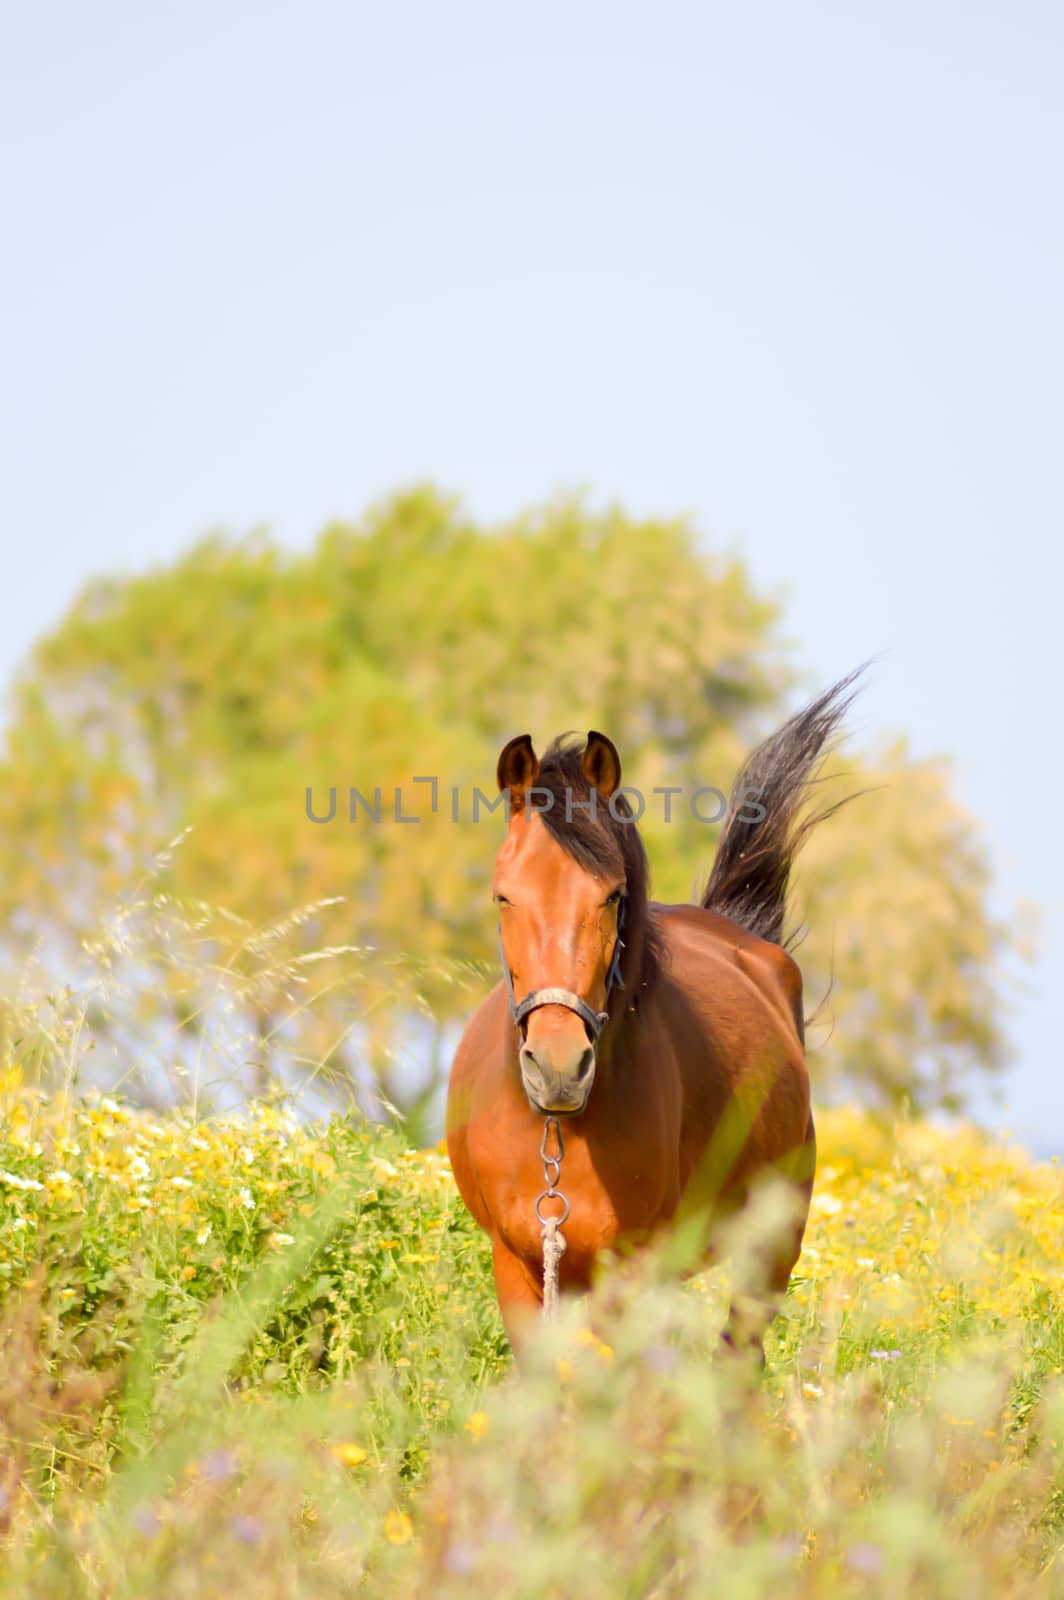 Brown horse in a meadow filled with daisies  by Philou1000